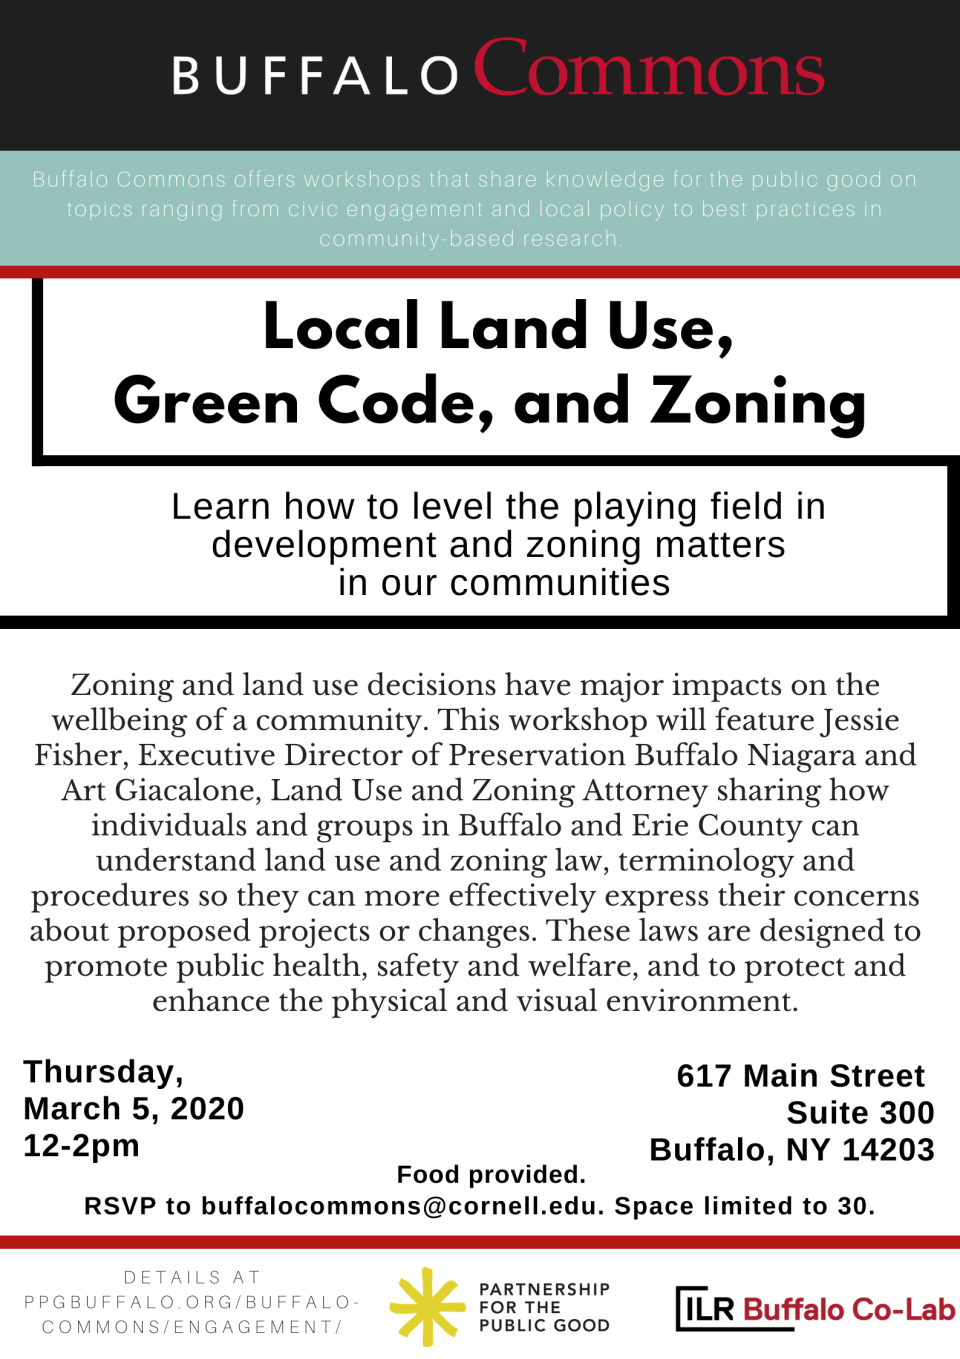 Buffalo Commons Workshop: Local Land Use, Green Code, and Zoning